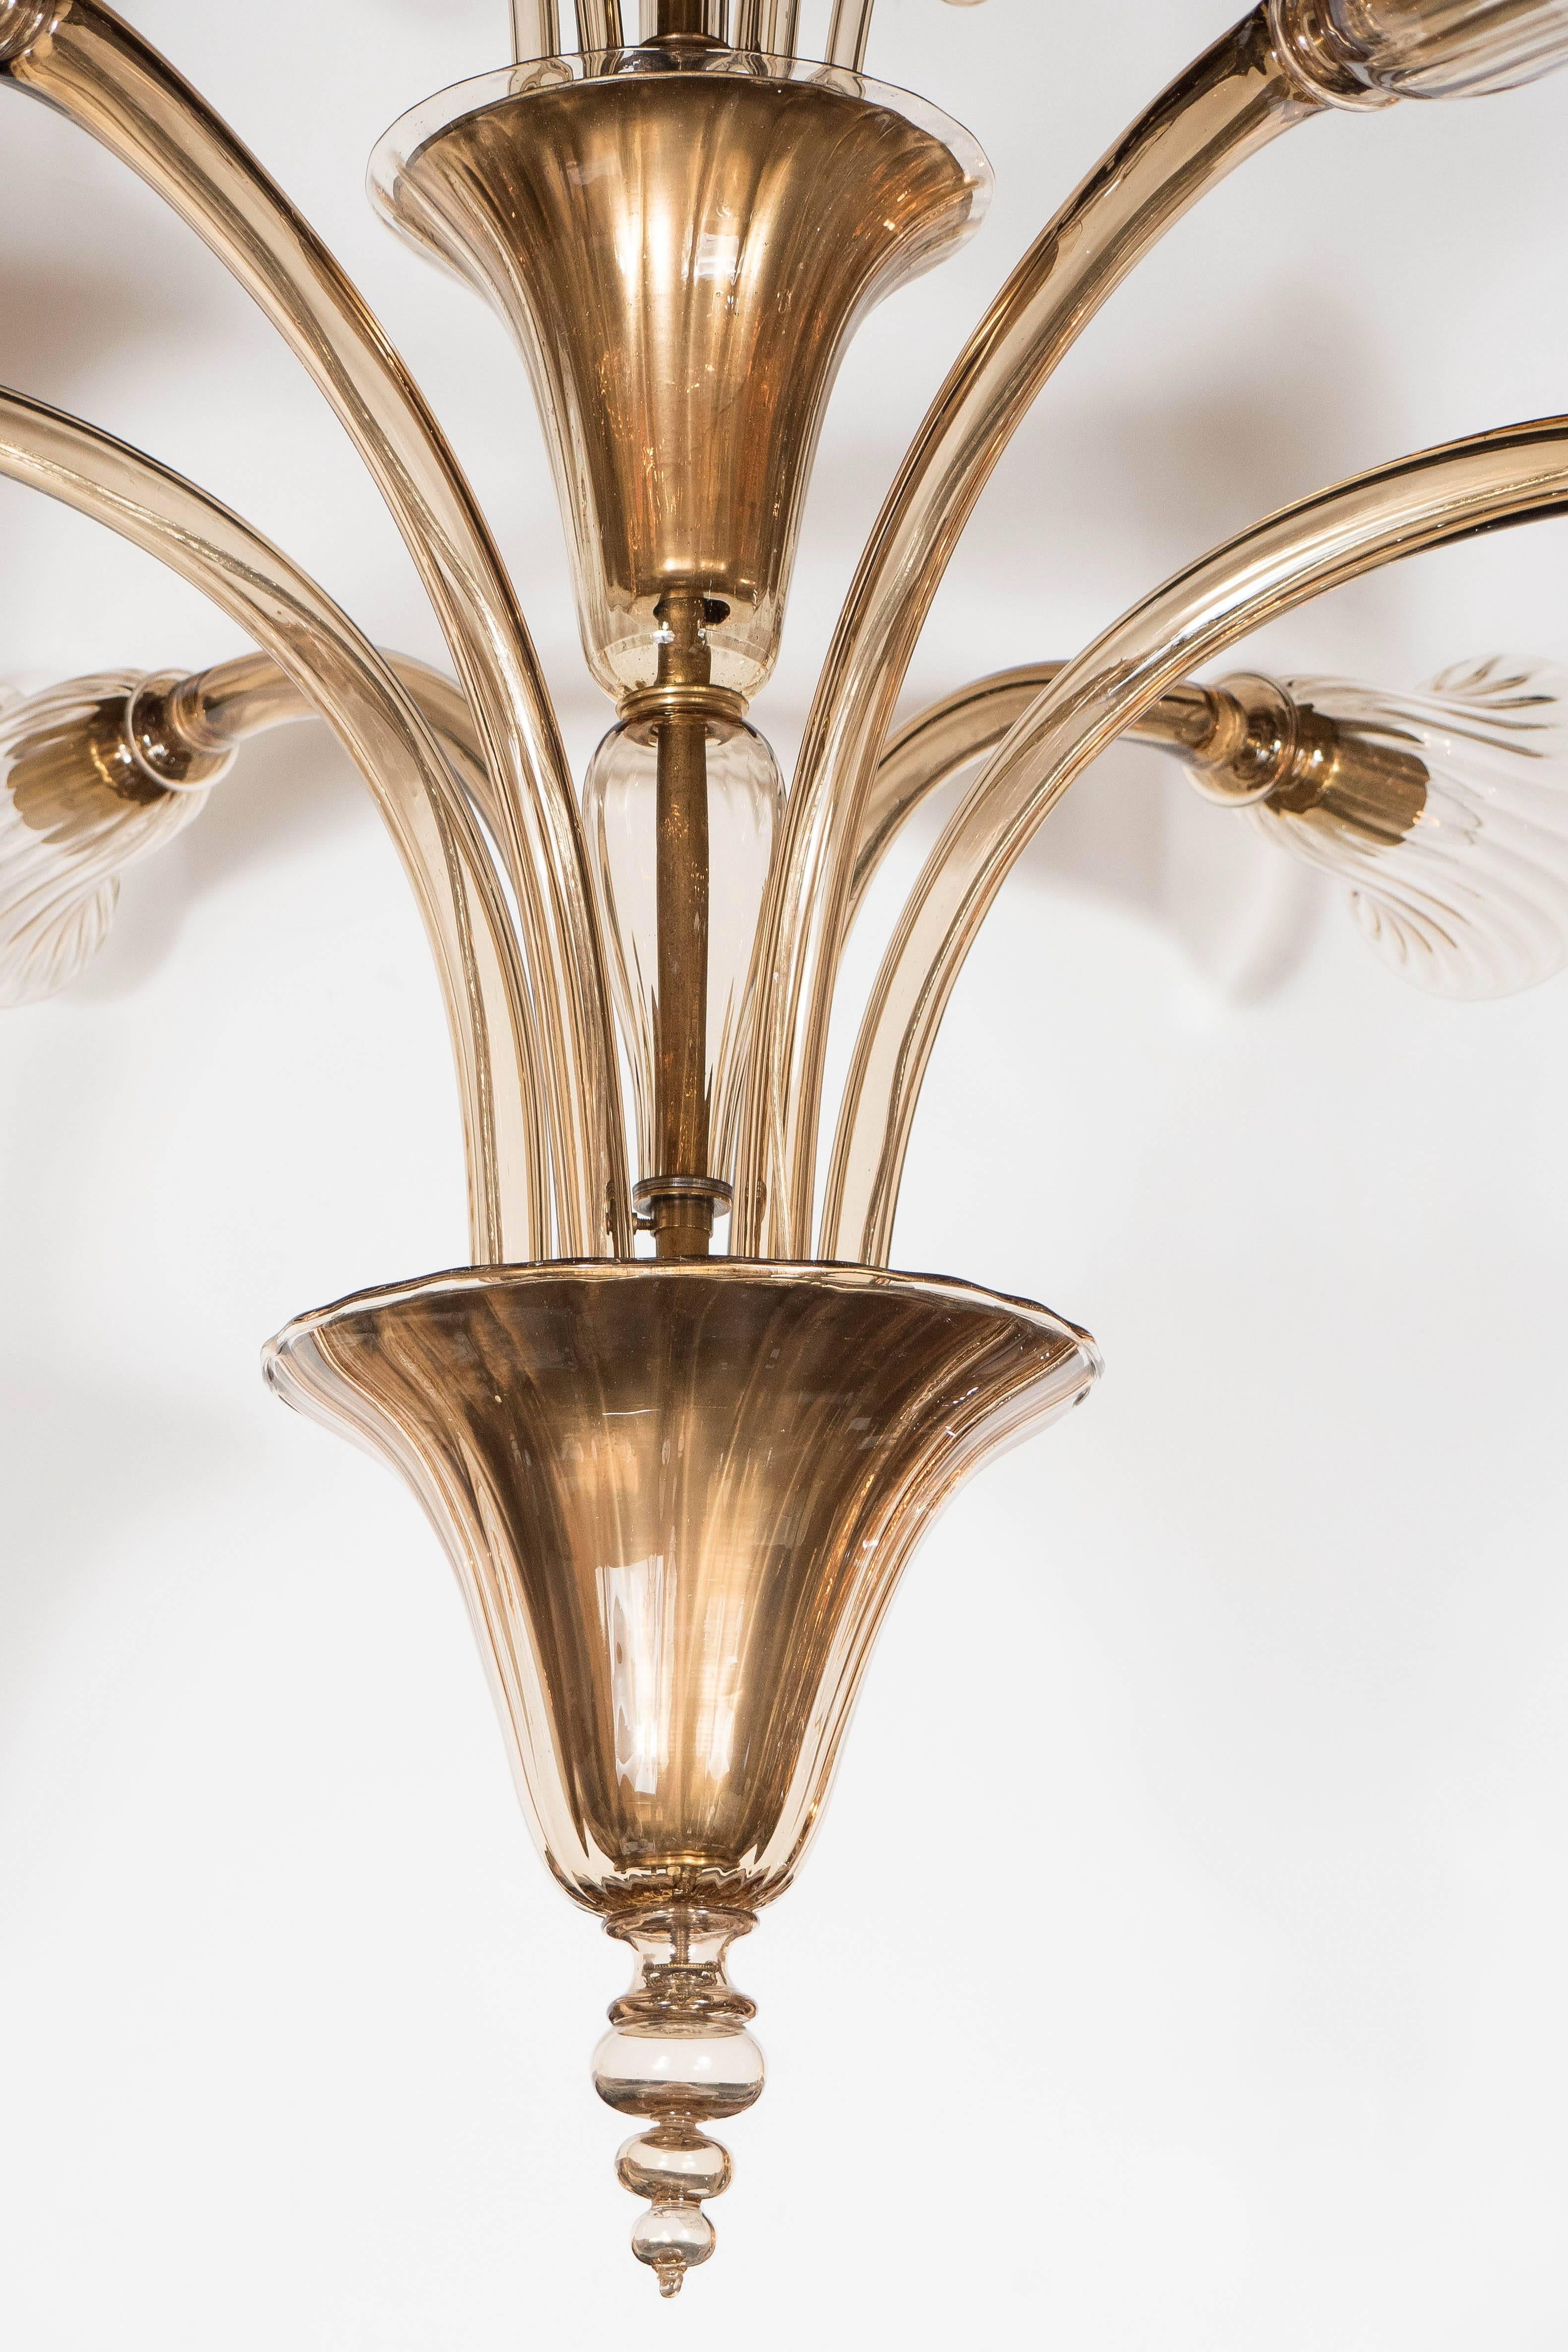 This elegant chandelier features six arms in stylized trumpet form on the lower tier and six rounded stylized tendrils in scroll design on the upper tier. The handblown Murano glass is an exquisite champagne color. Each of the arms emanates out of